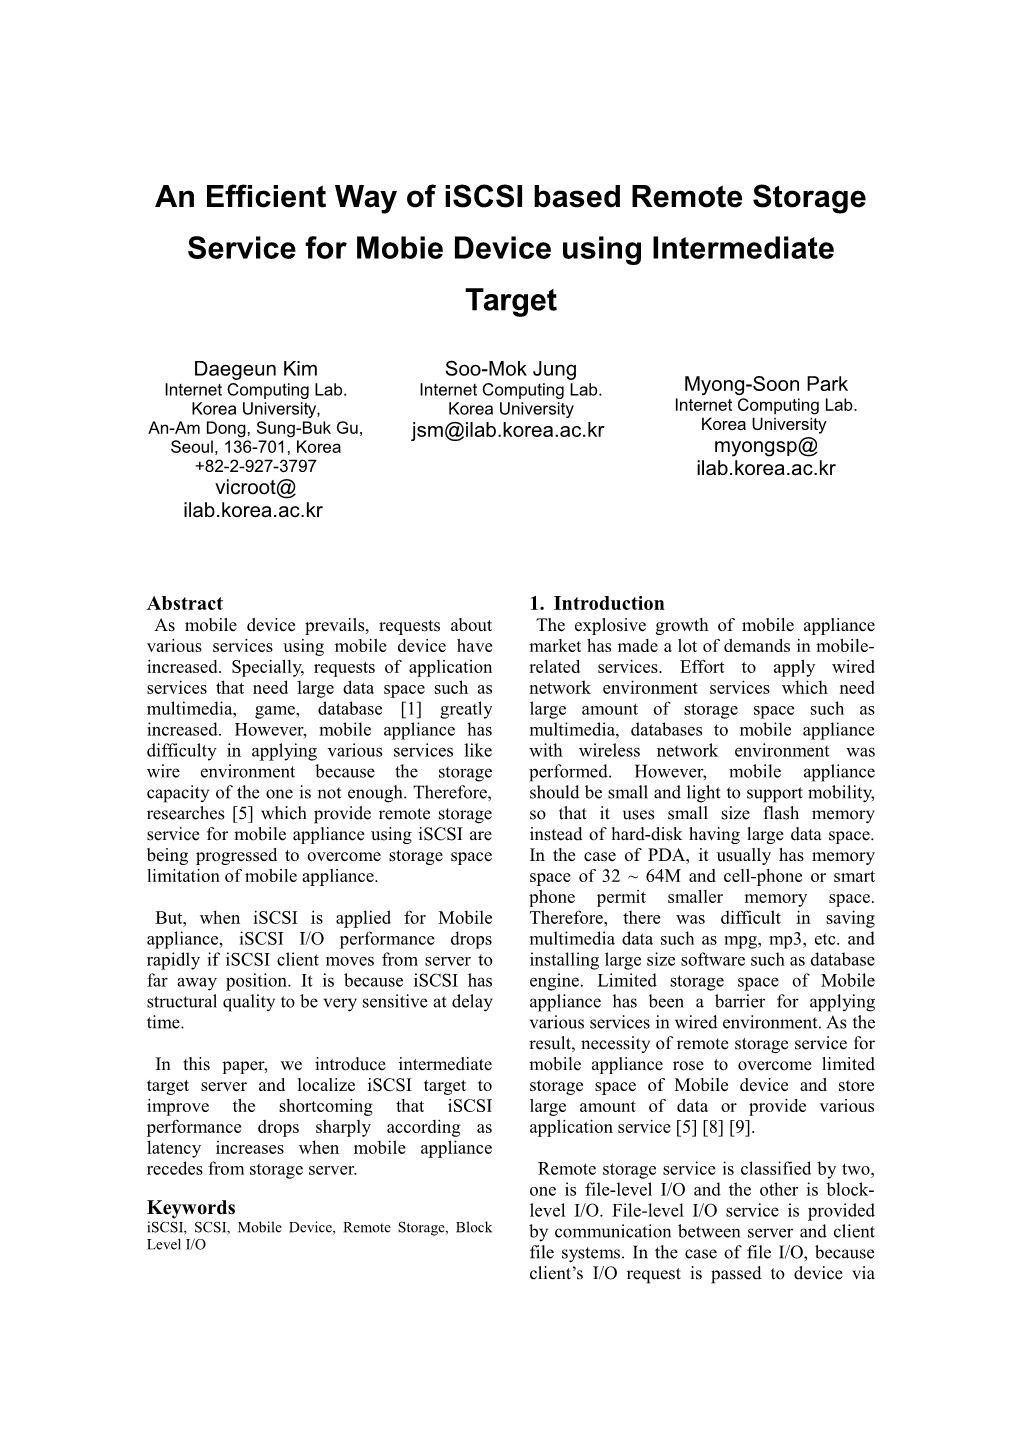 Efficient Way of Iscsi Based Remote Storage Service for Mobie Device Using Intermediate Target